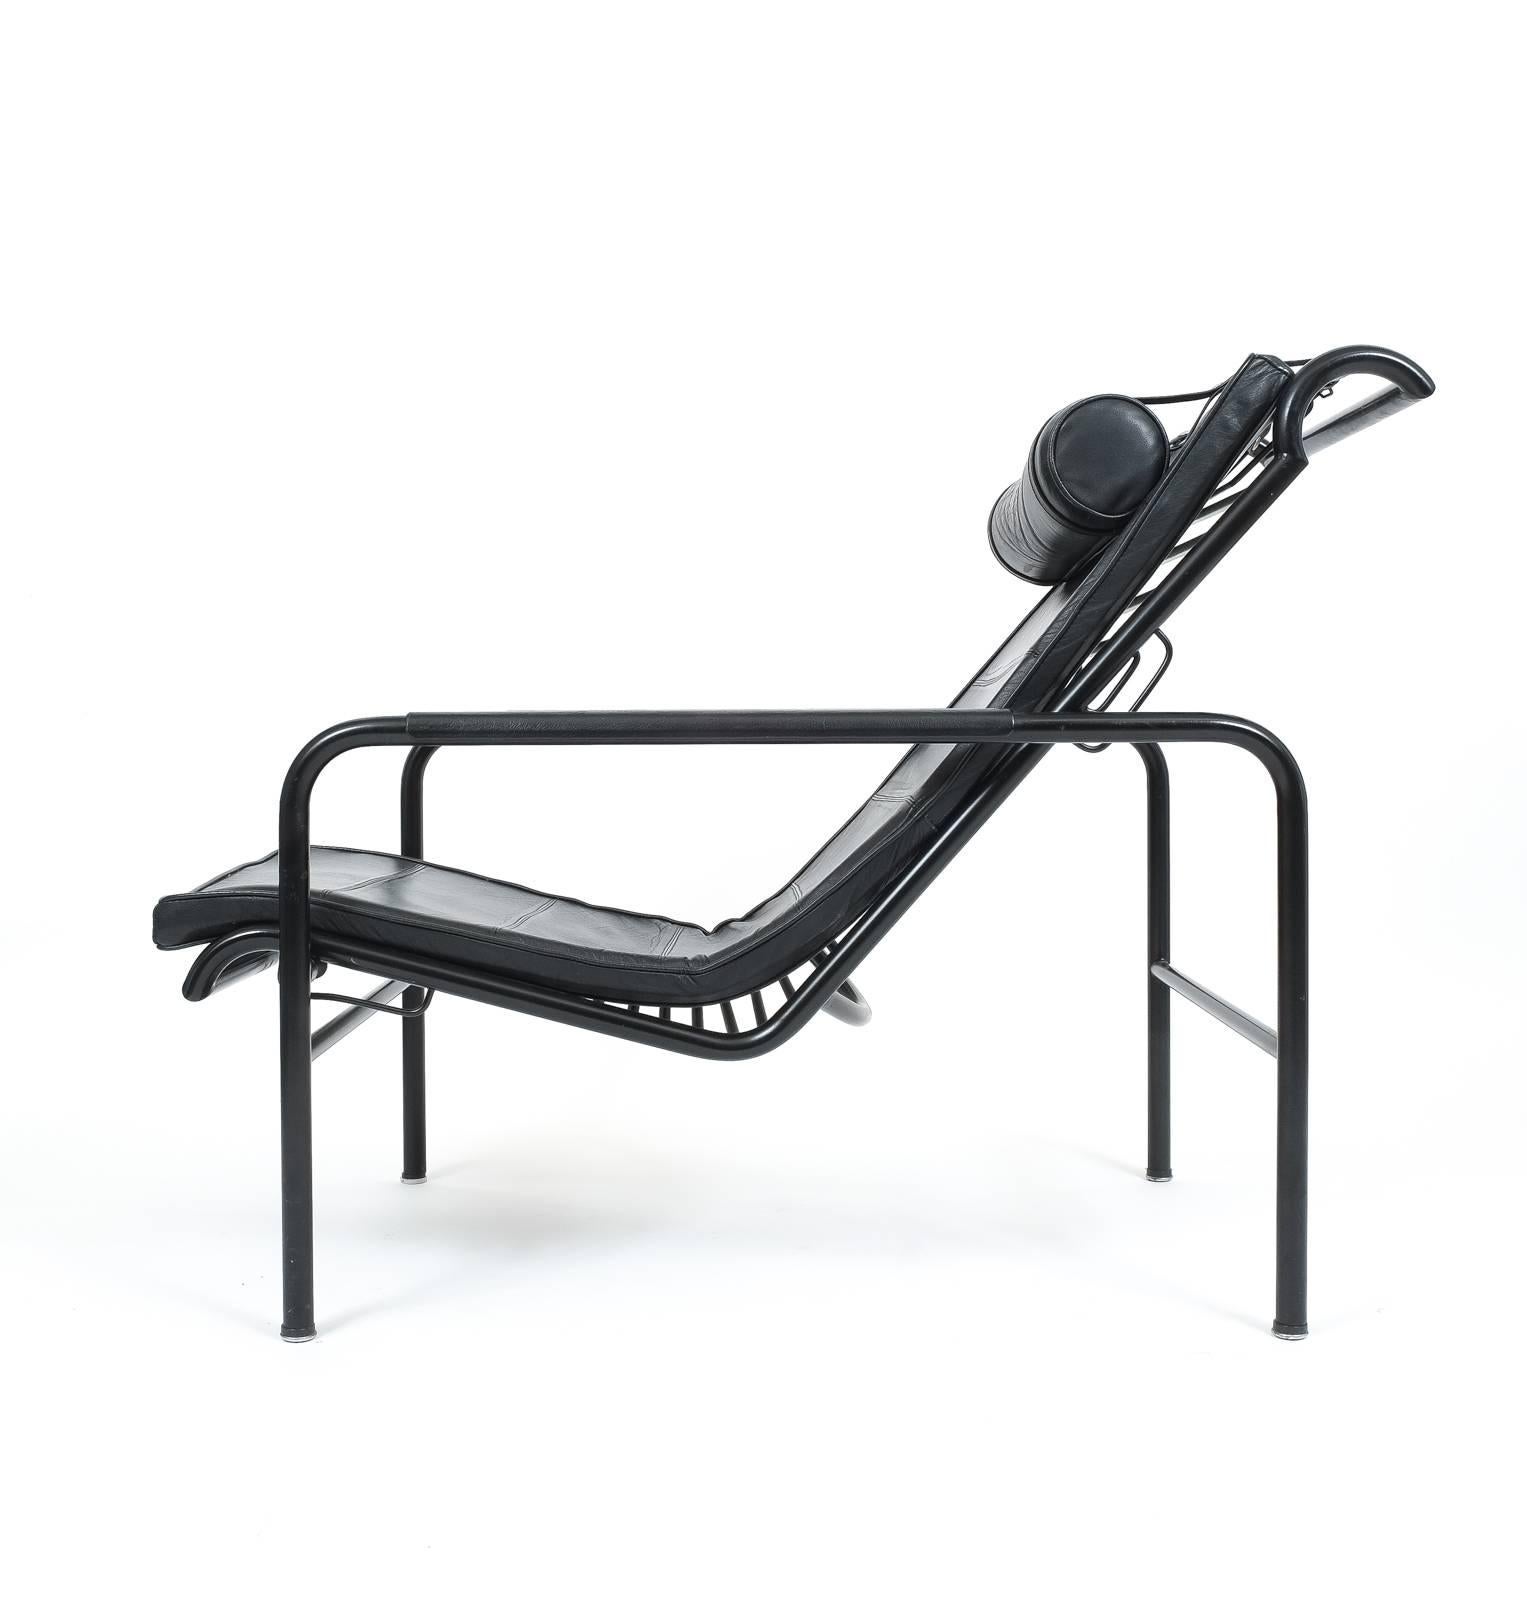 Rare all black Genni chaise designed in 1935 by Gabriele Mucchi for Zanotta, produced circa 1965.

This early piece has still got the original cushions and headrest, the frame is made from black tubular steel whereas the armrests are covered in